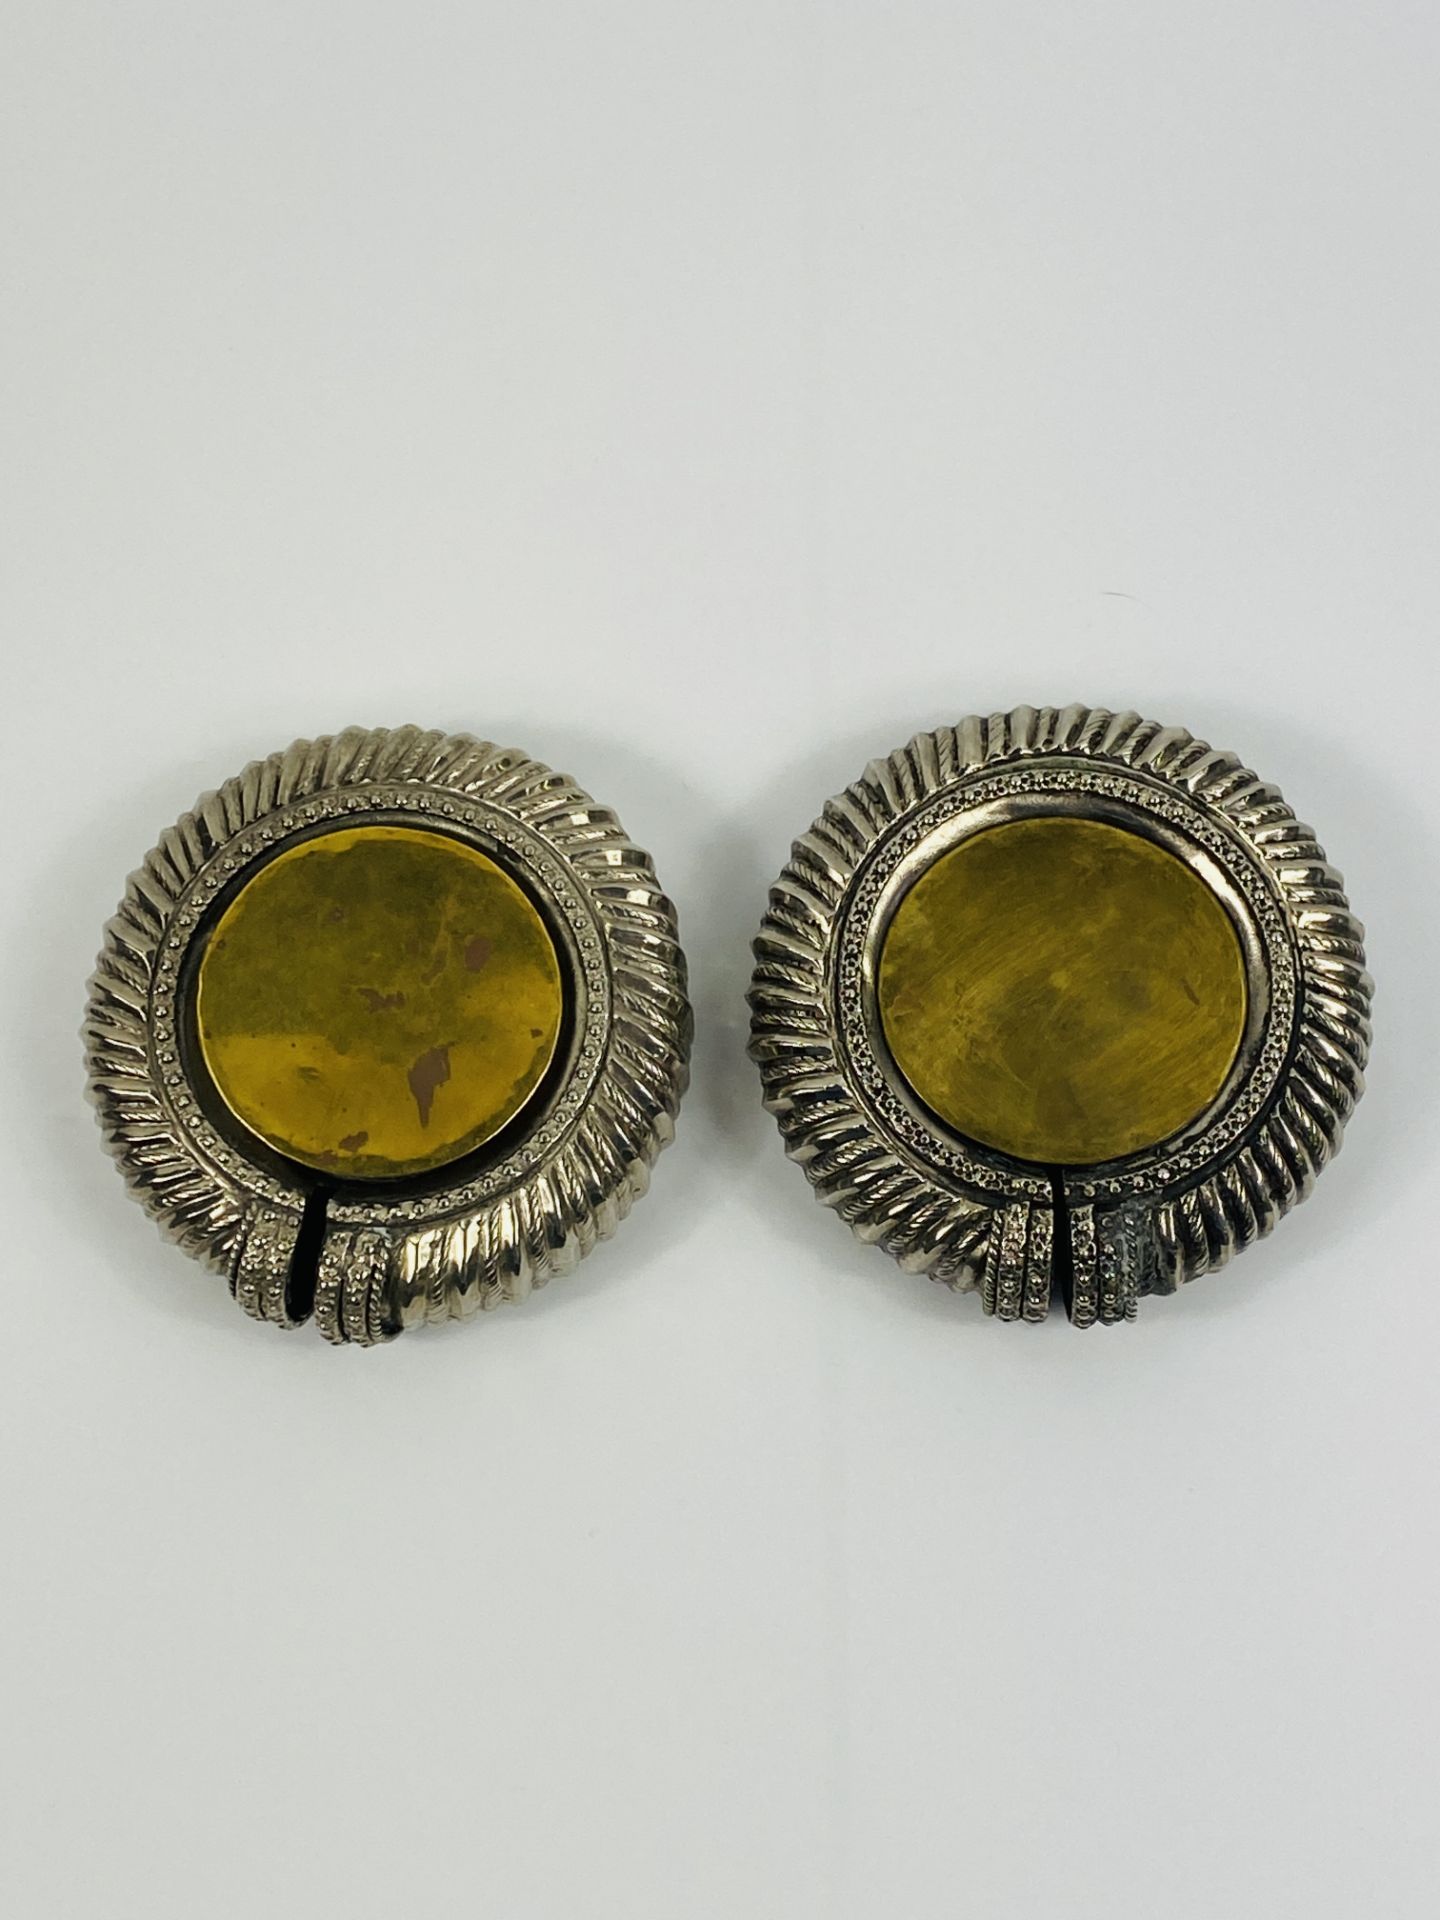 Pair of white metal ankle bangles with brass inserts - Image 2 of 7